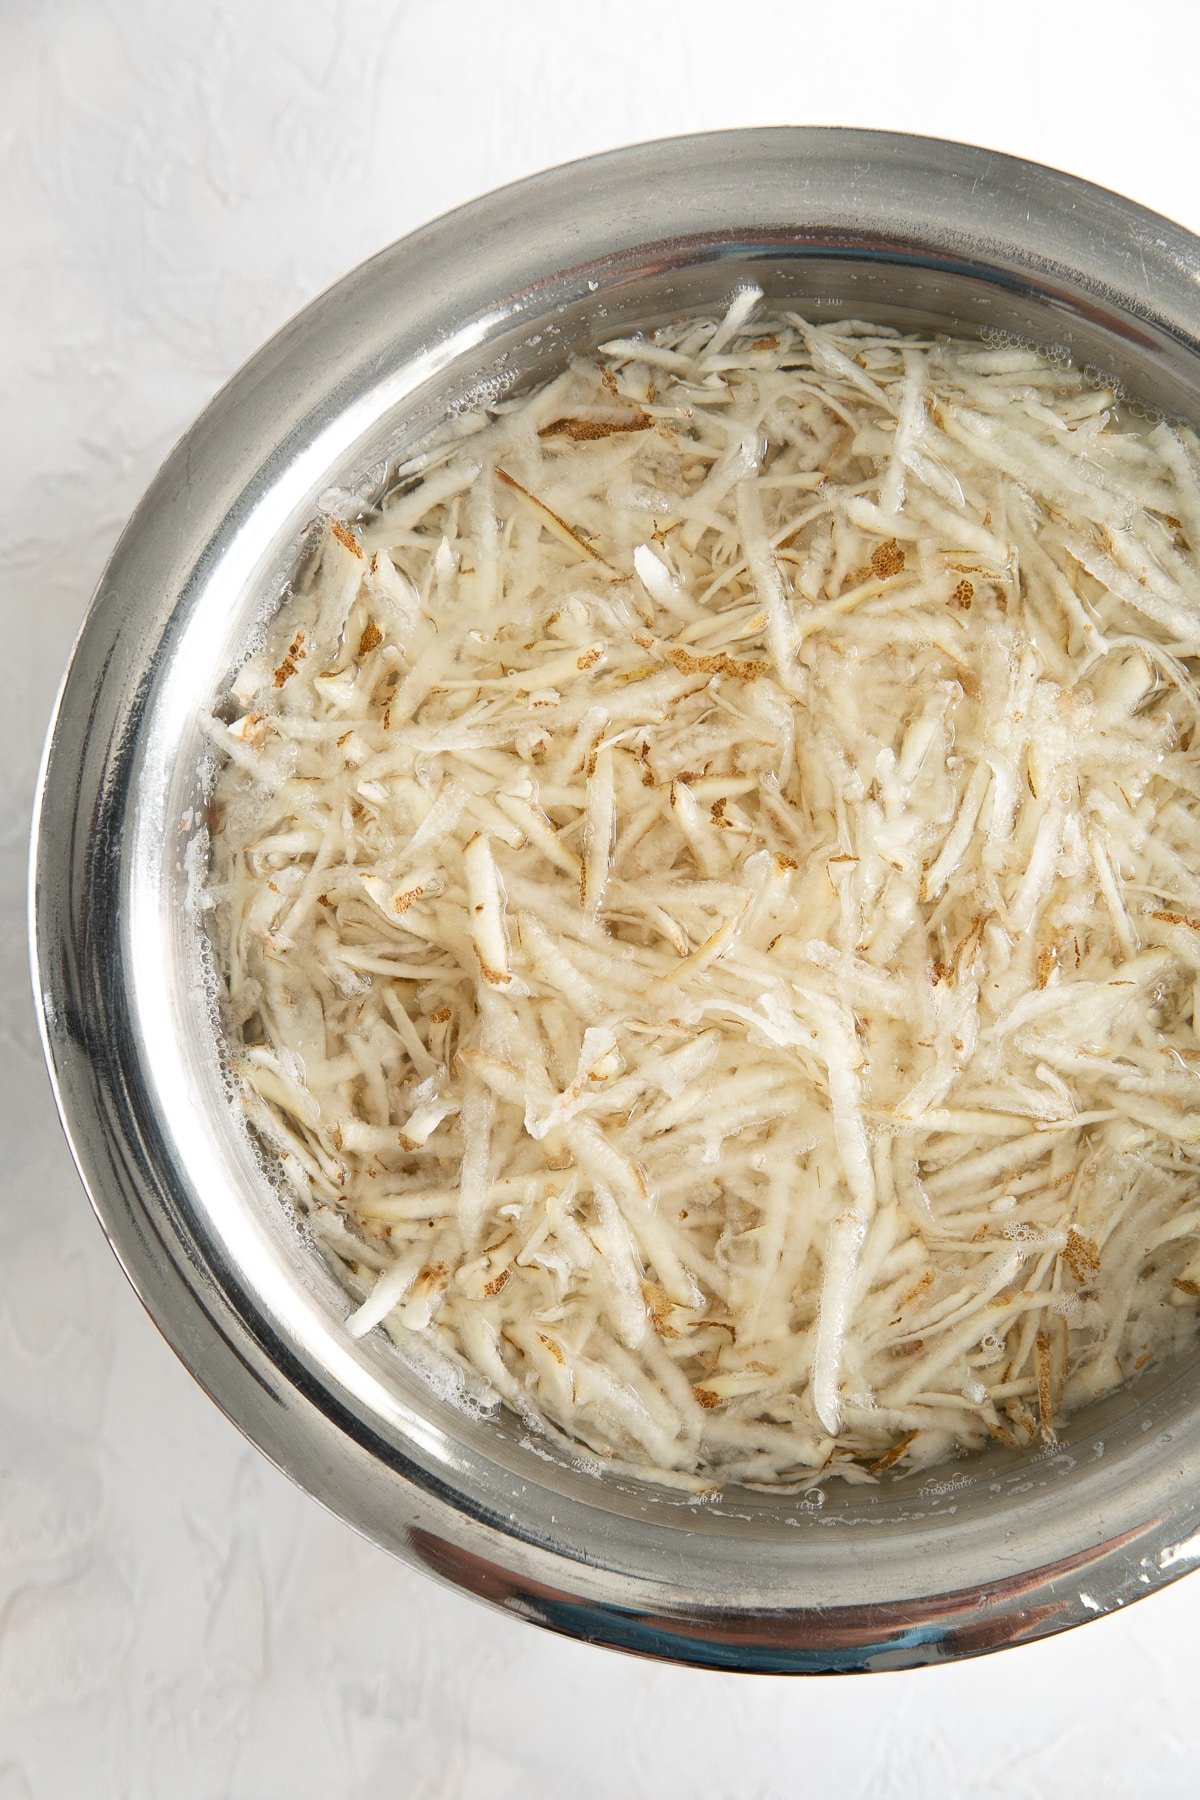 Shredded potatoes in a large bowl of cold water.